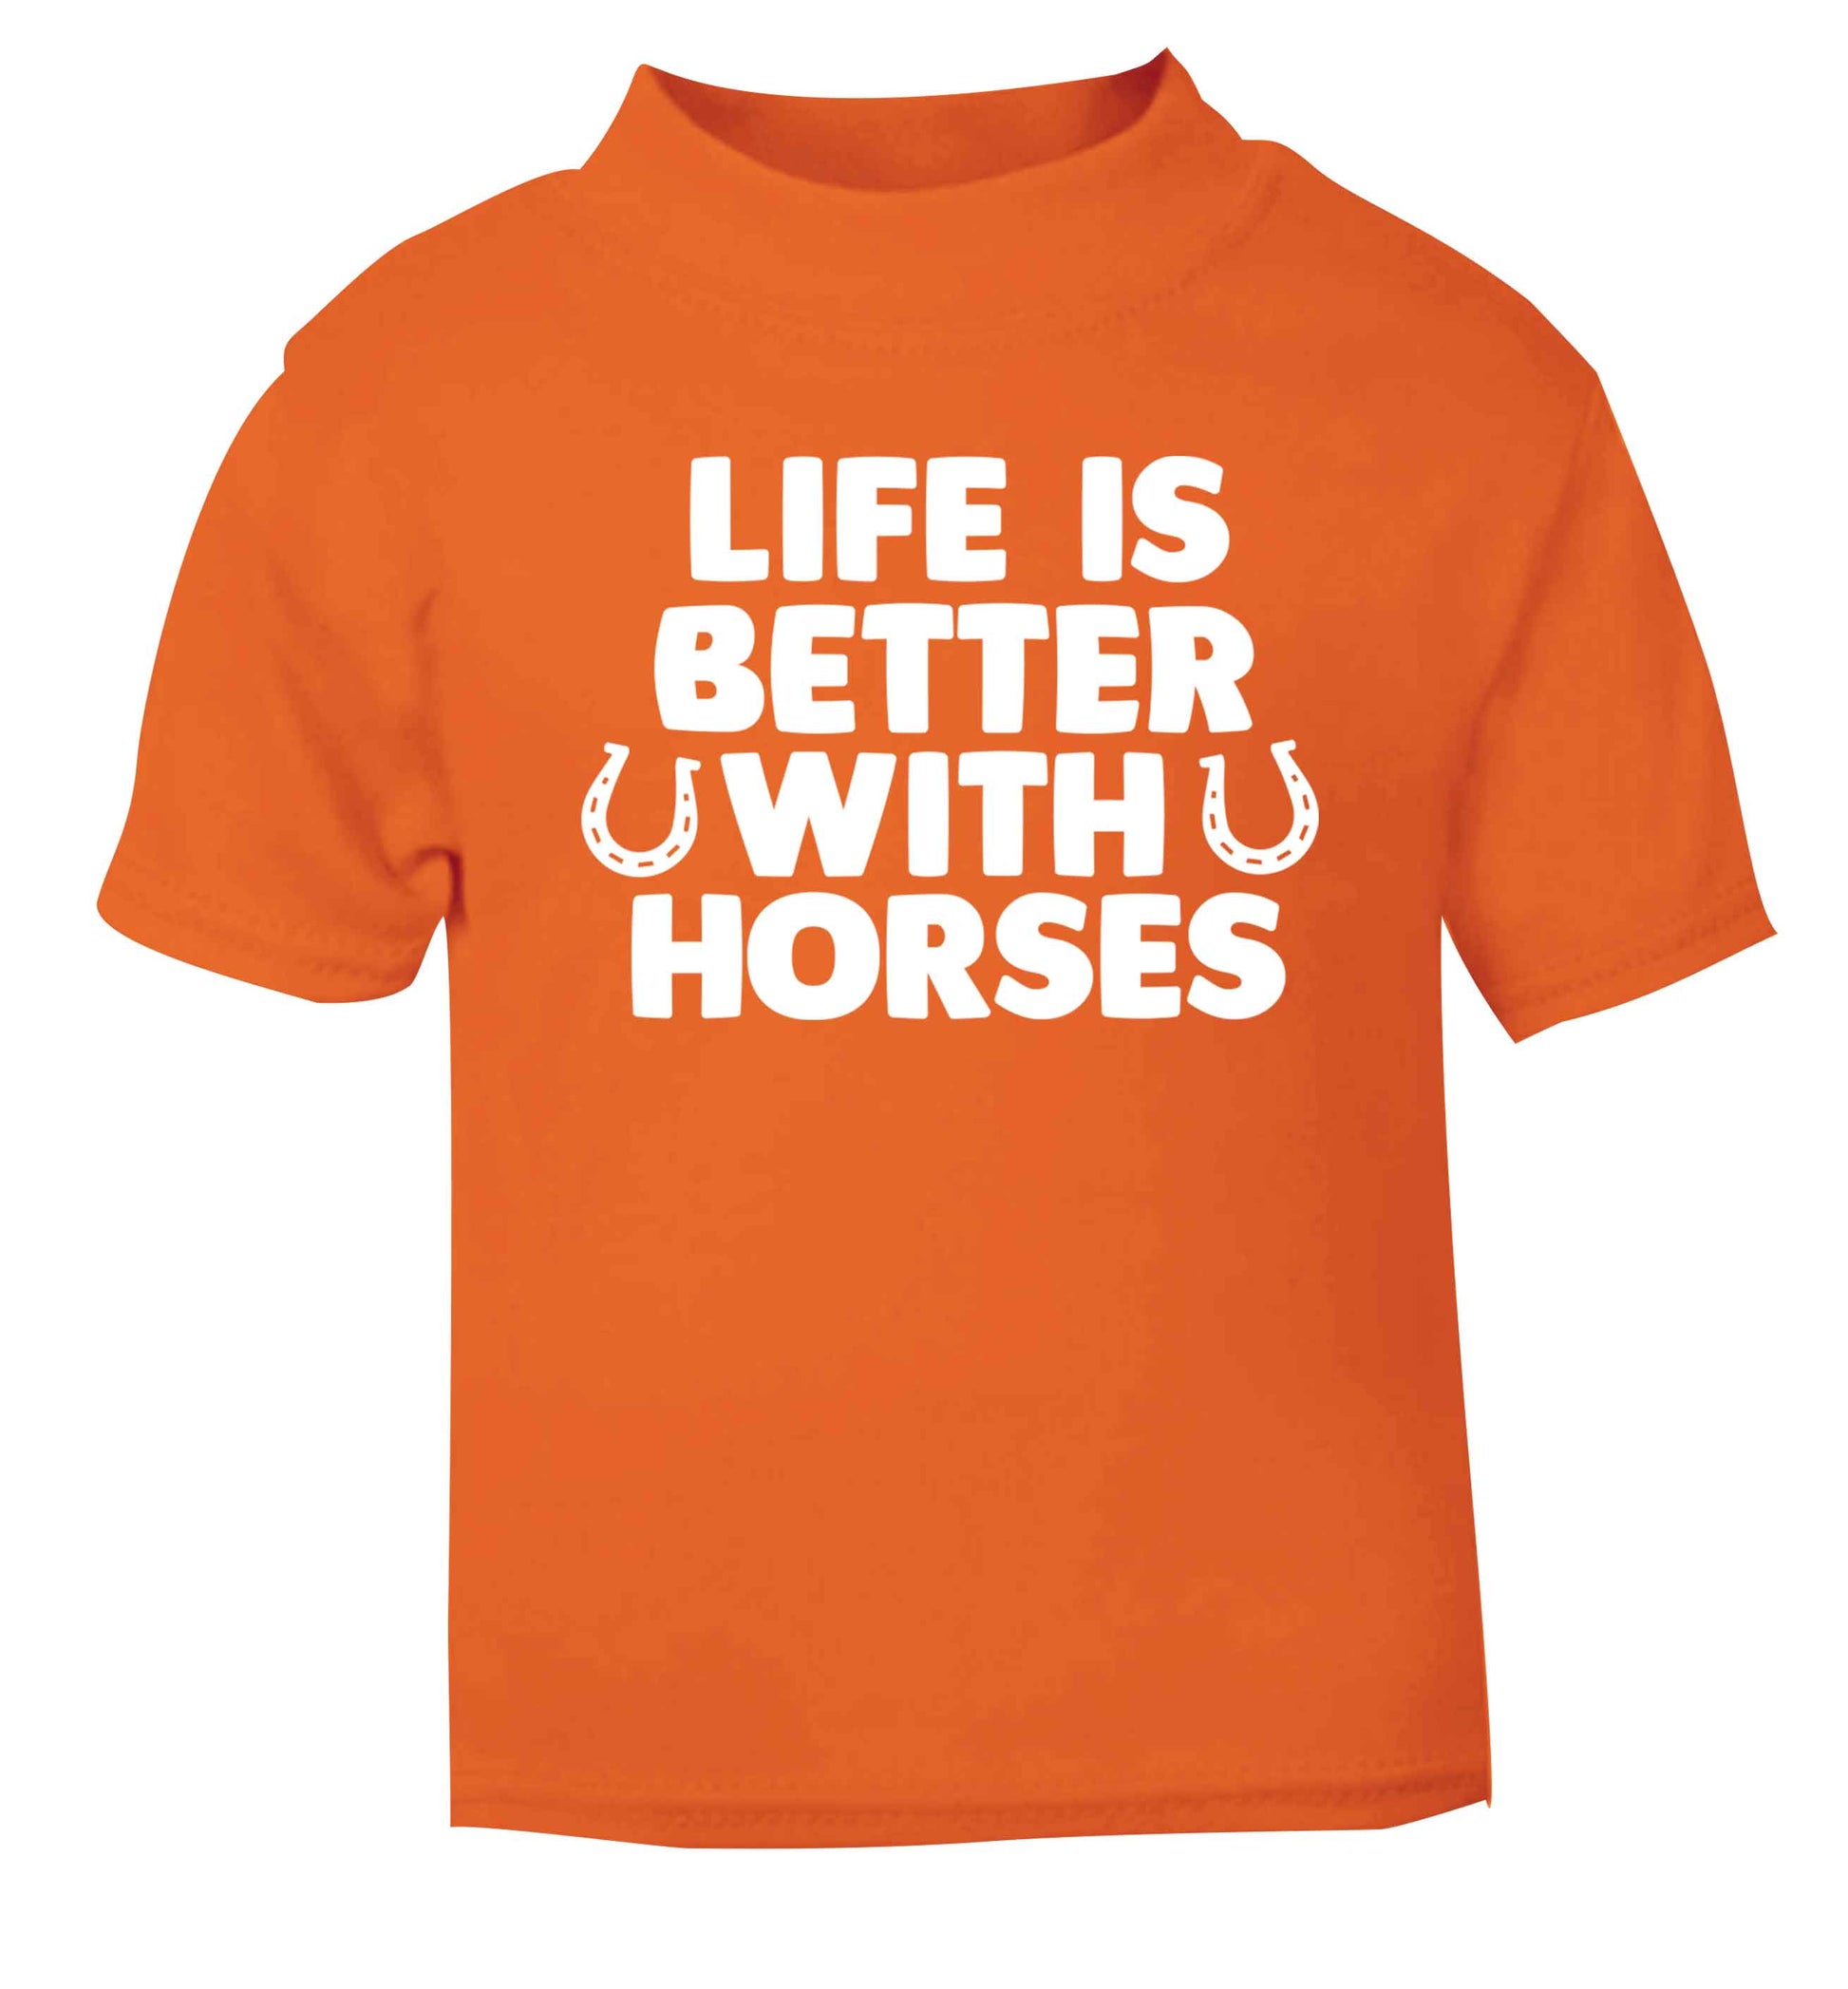 Life is better with horses orange baby toddler Tshirt 2 Years